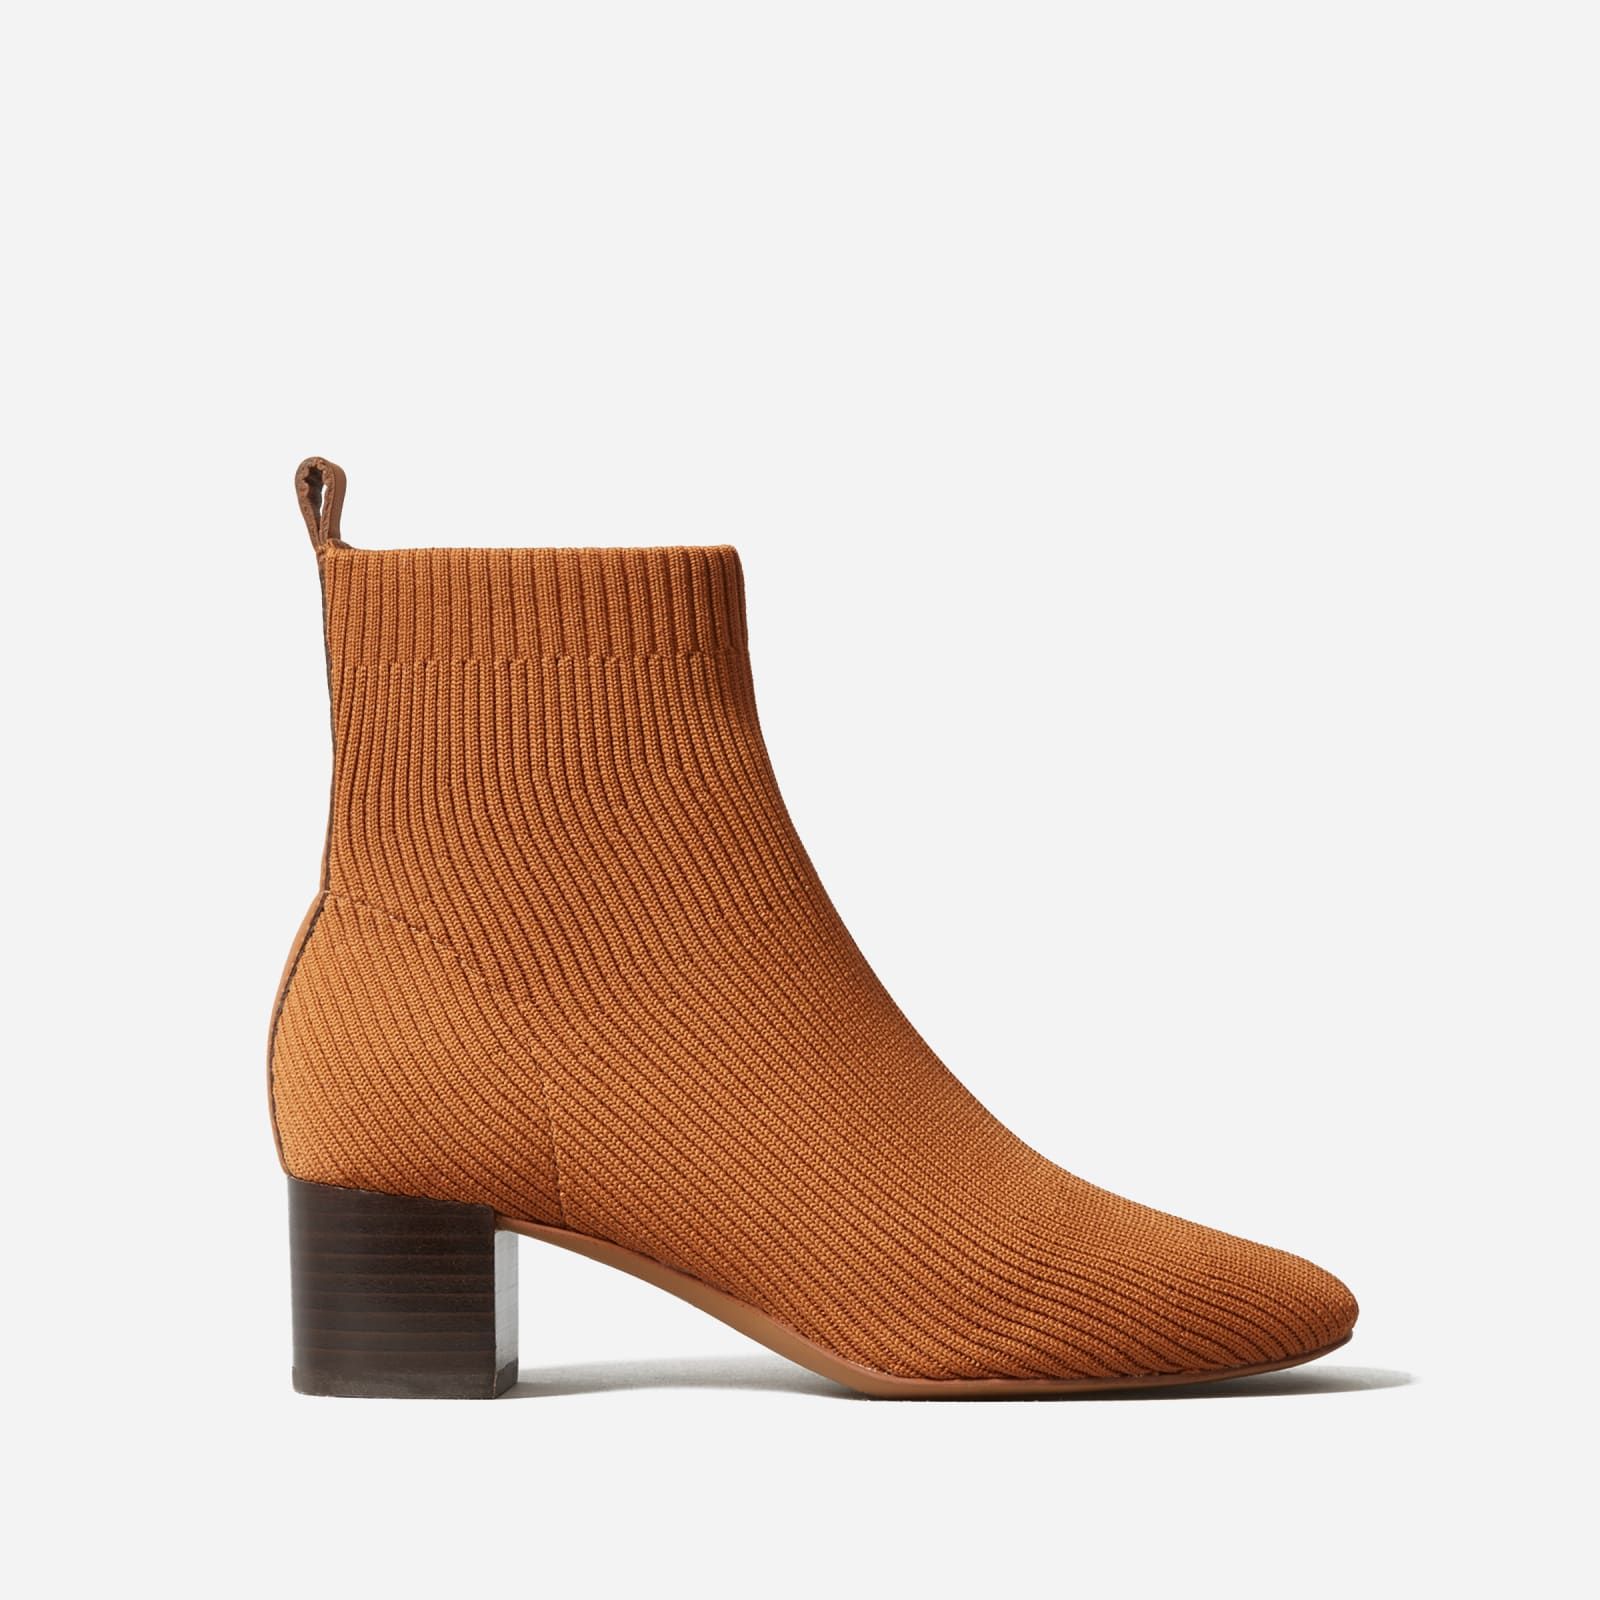 Women's Glove Boot in ReKnit by Everlane in Toffee, Size 10 | Everlane